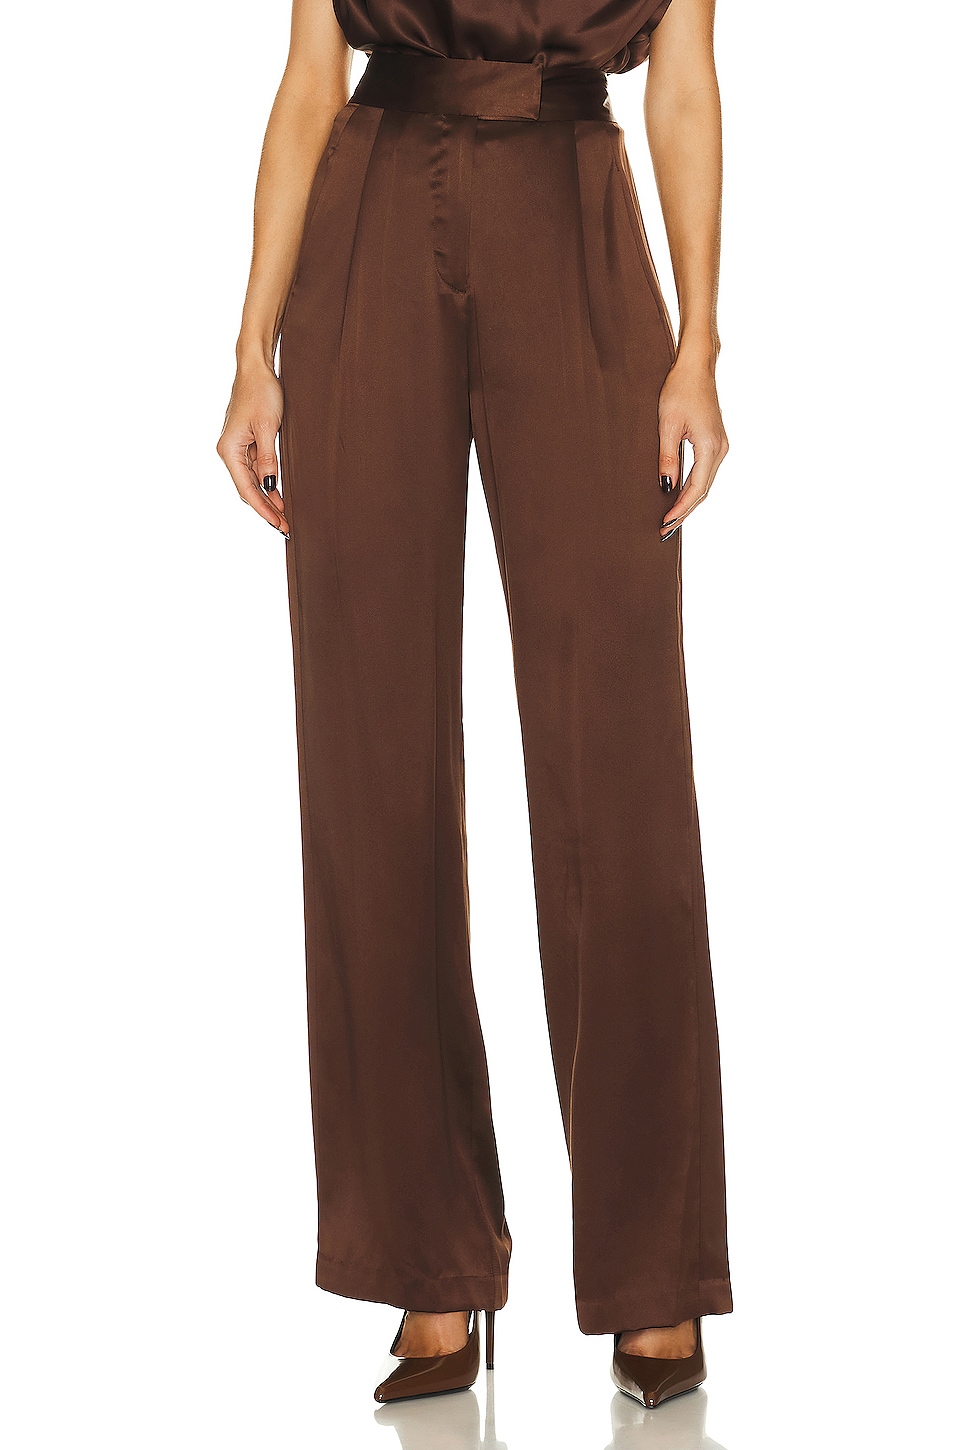 Image 1 of The Sei Wide Leg Trouser in Chocolate